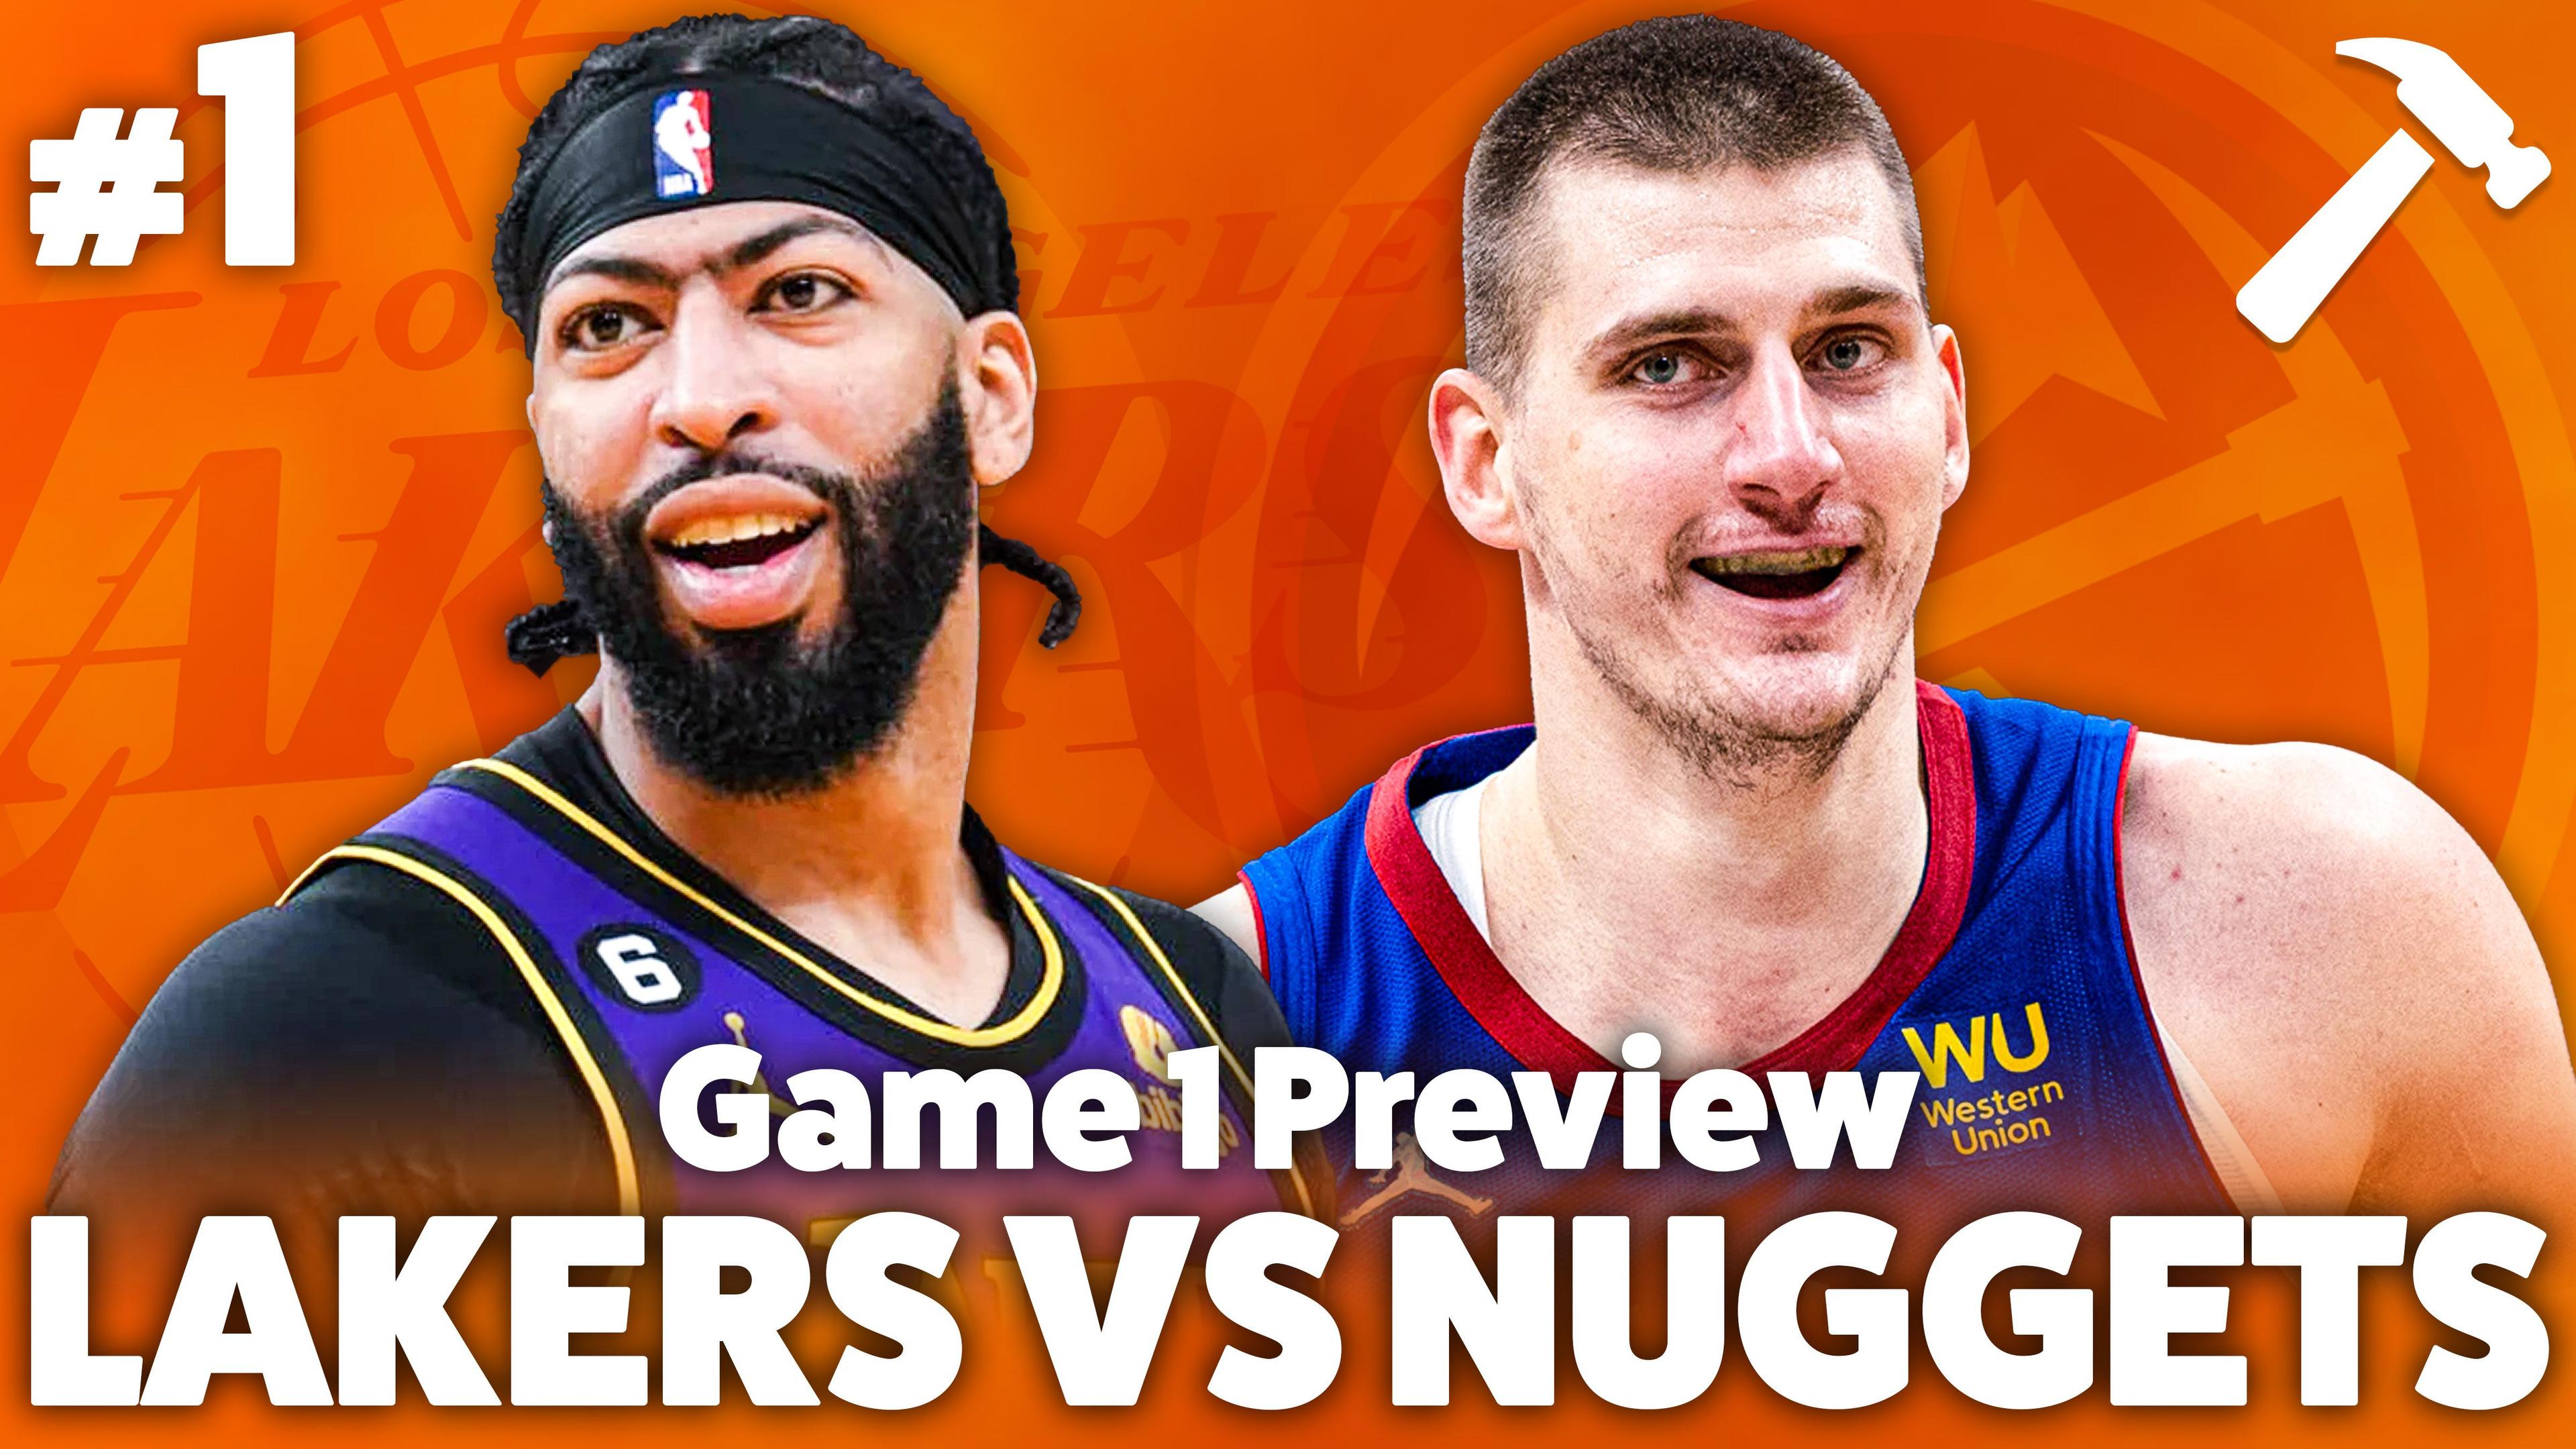 Lakers vs Nuggets Game 1 Preview.jpg